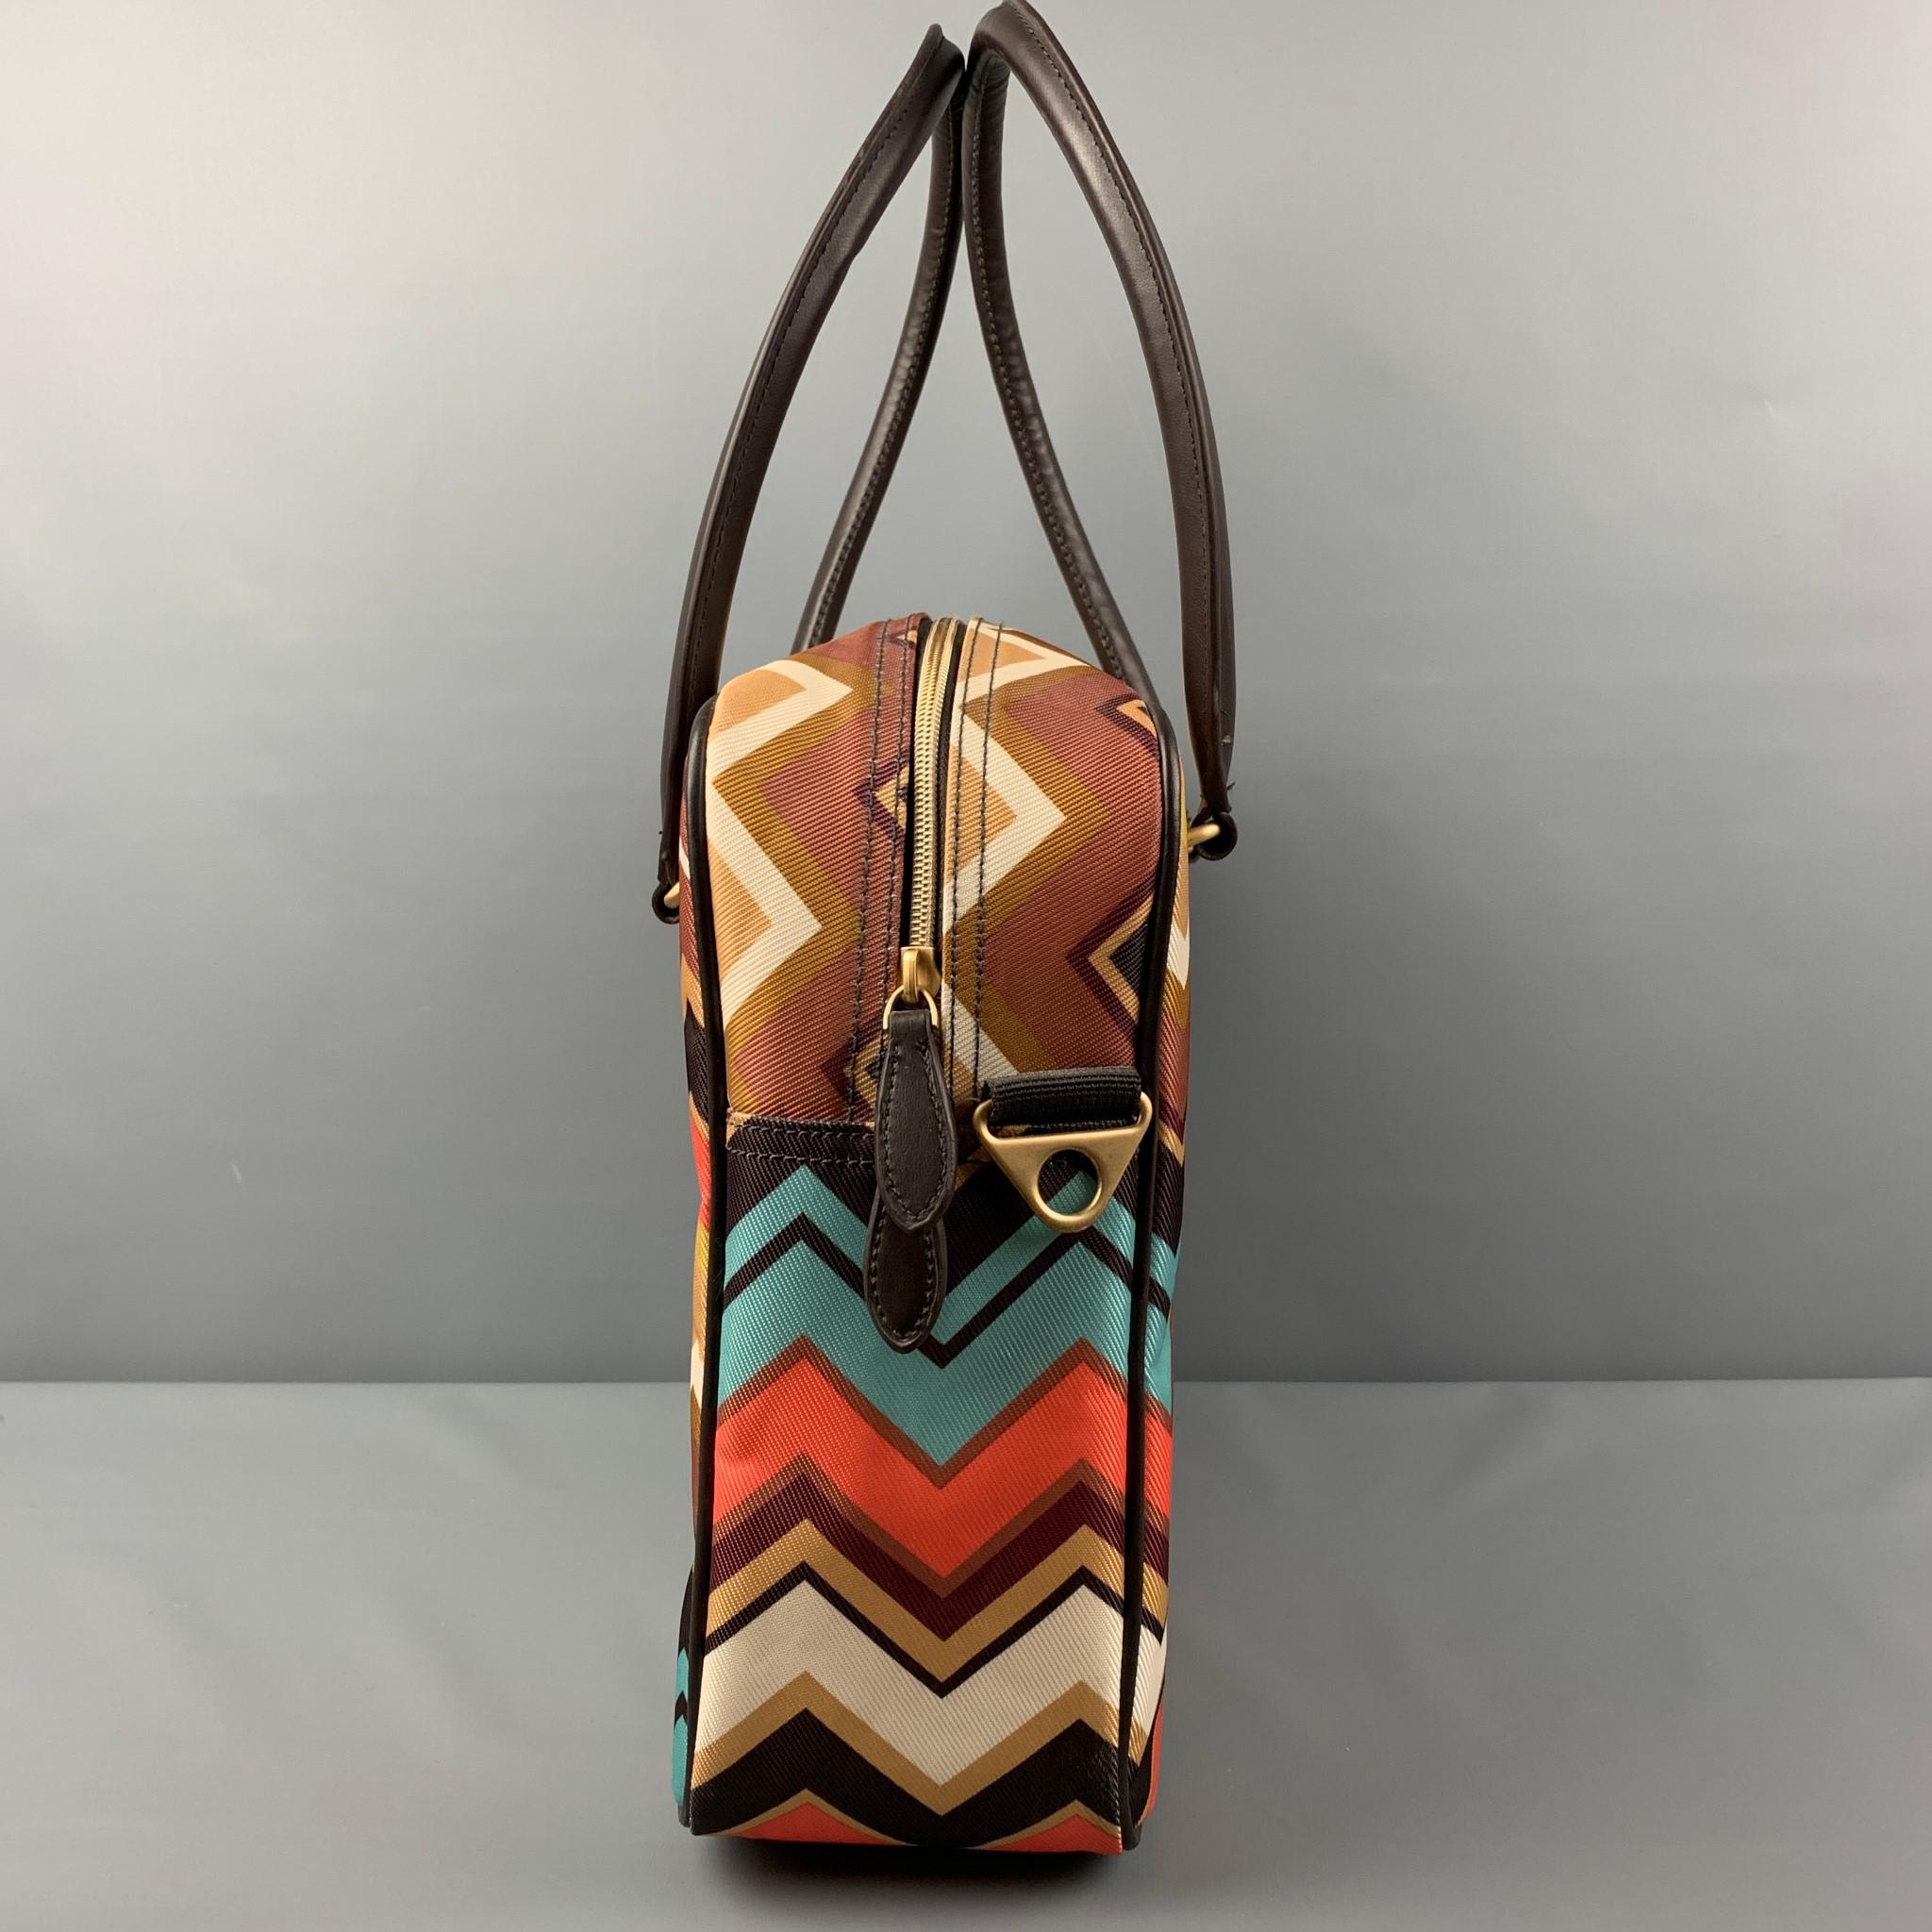 MISSONI x Target bag comes in a multi-color chevron print polyester featuring a tote style, top handles, leather trim, inner pocket, detachable cross body strap, and a top zipper closure. 

Very Good Pre-Owned Condition.

Measurements:

Length: 15.5